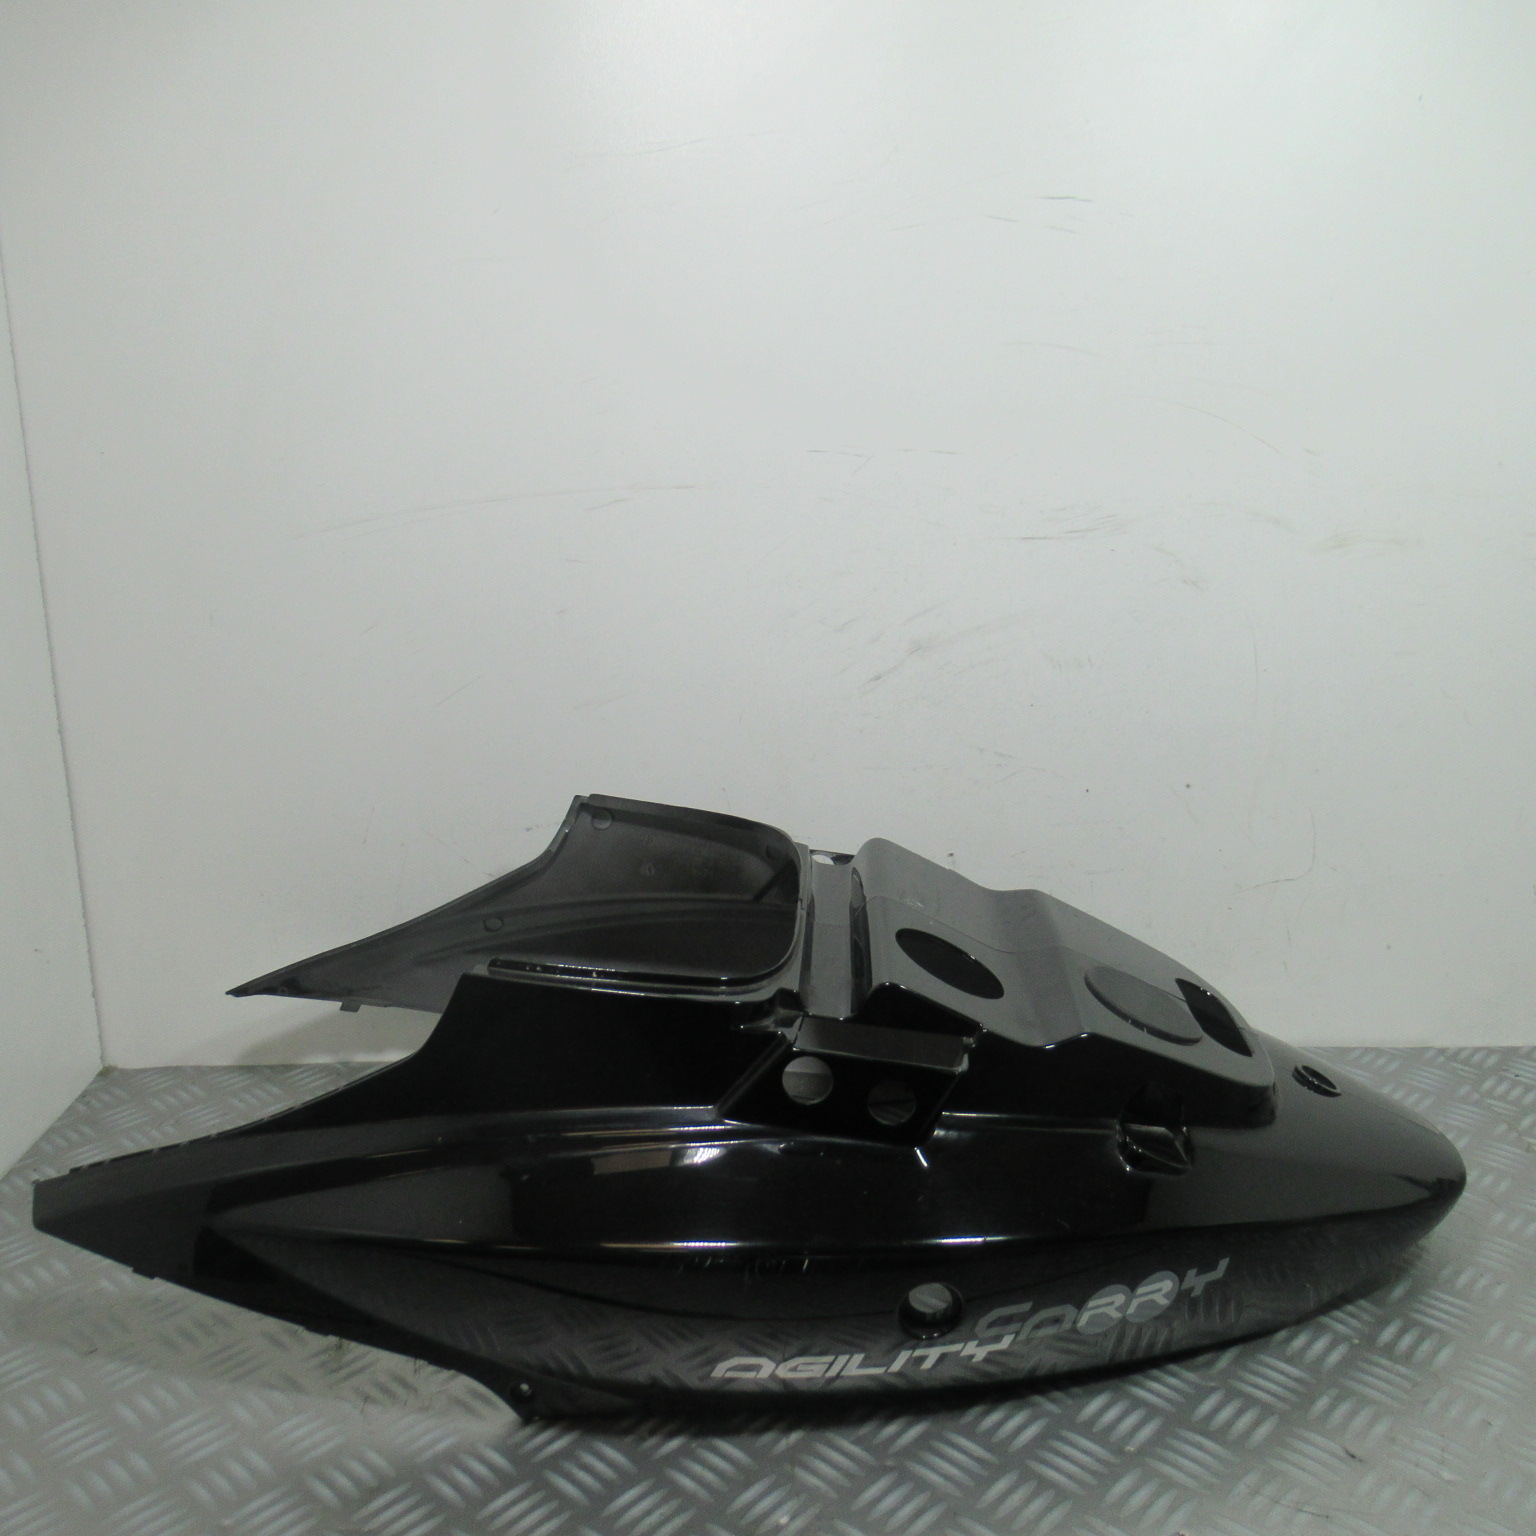 Coque arriere Kymco Agility 50 4t (83600-LCB9-C000-CK) (83500-LCB9-C0000-CK)